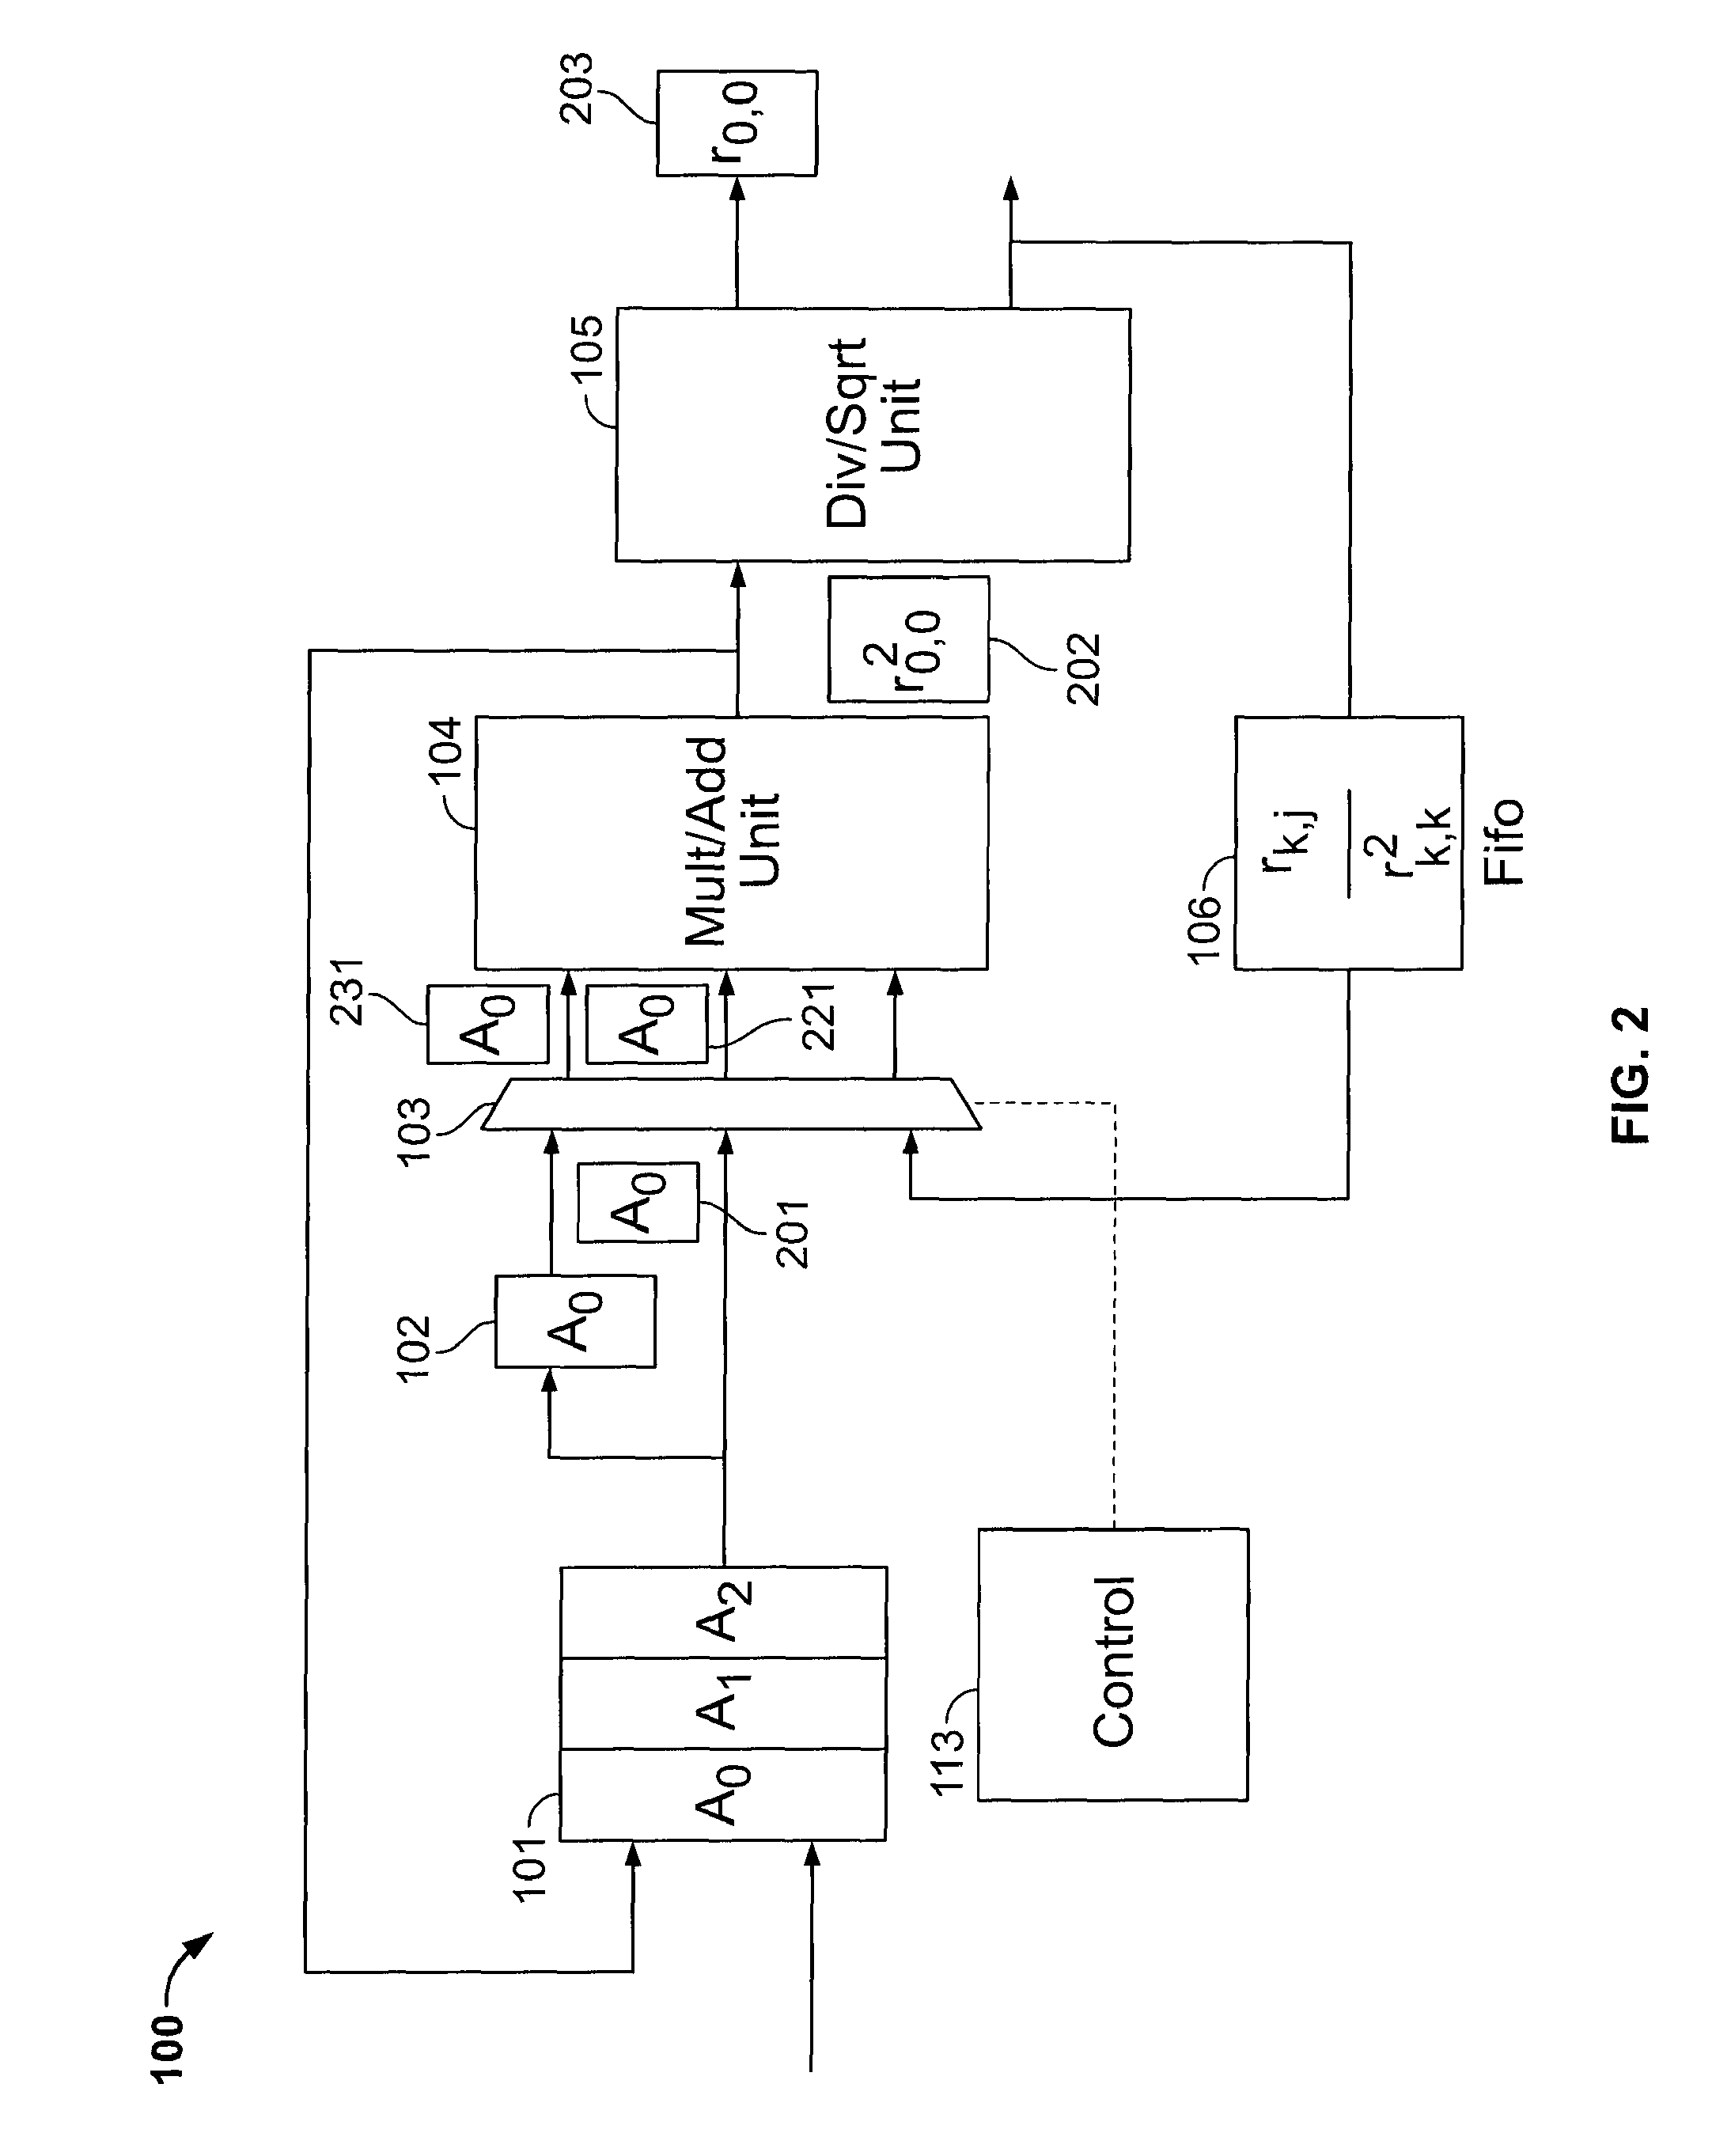 QR decomposition in an integrated circuit device